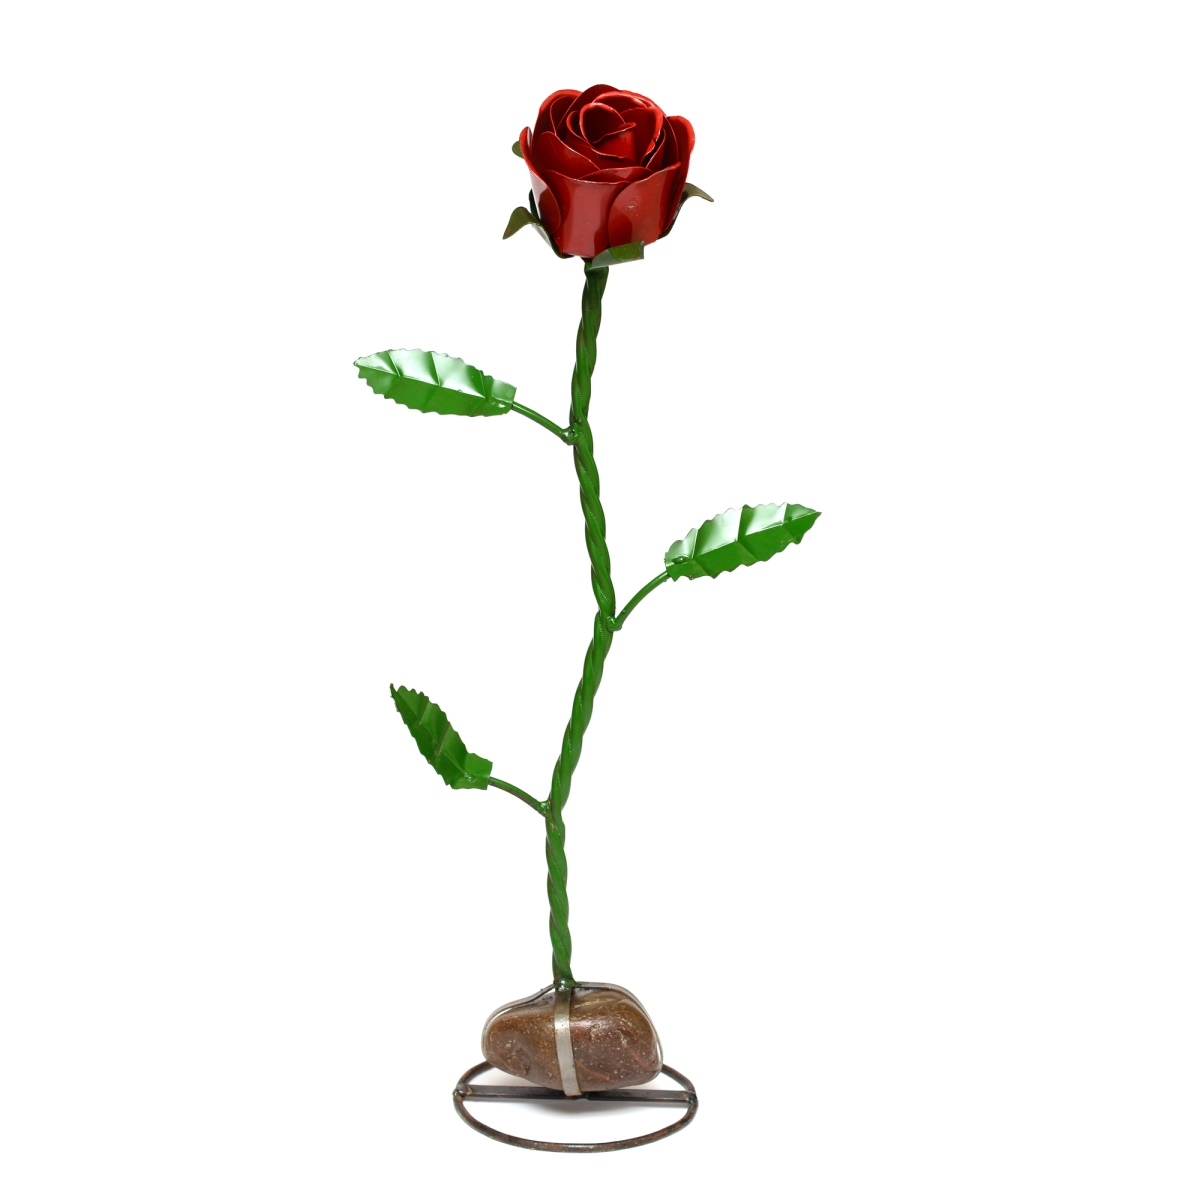 10210 Rose With Rock Base For Figurine Decor